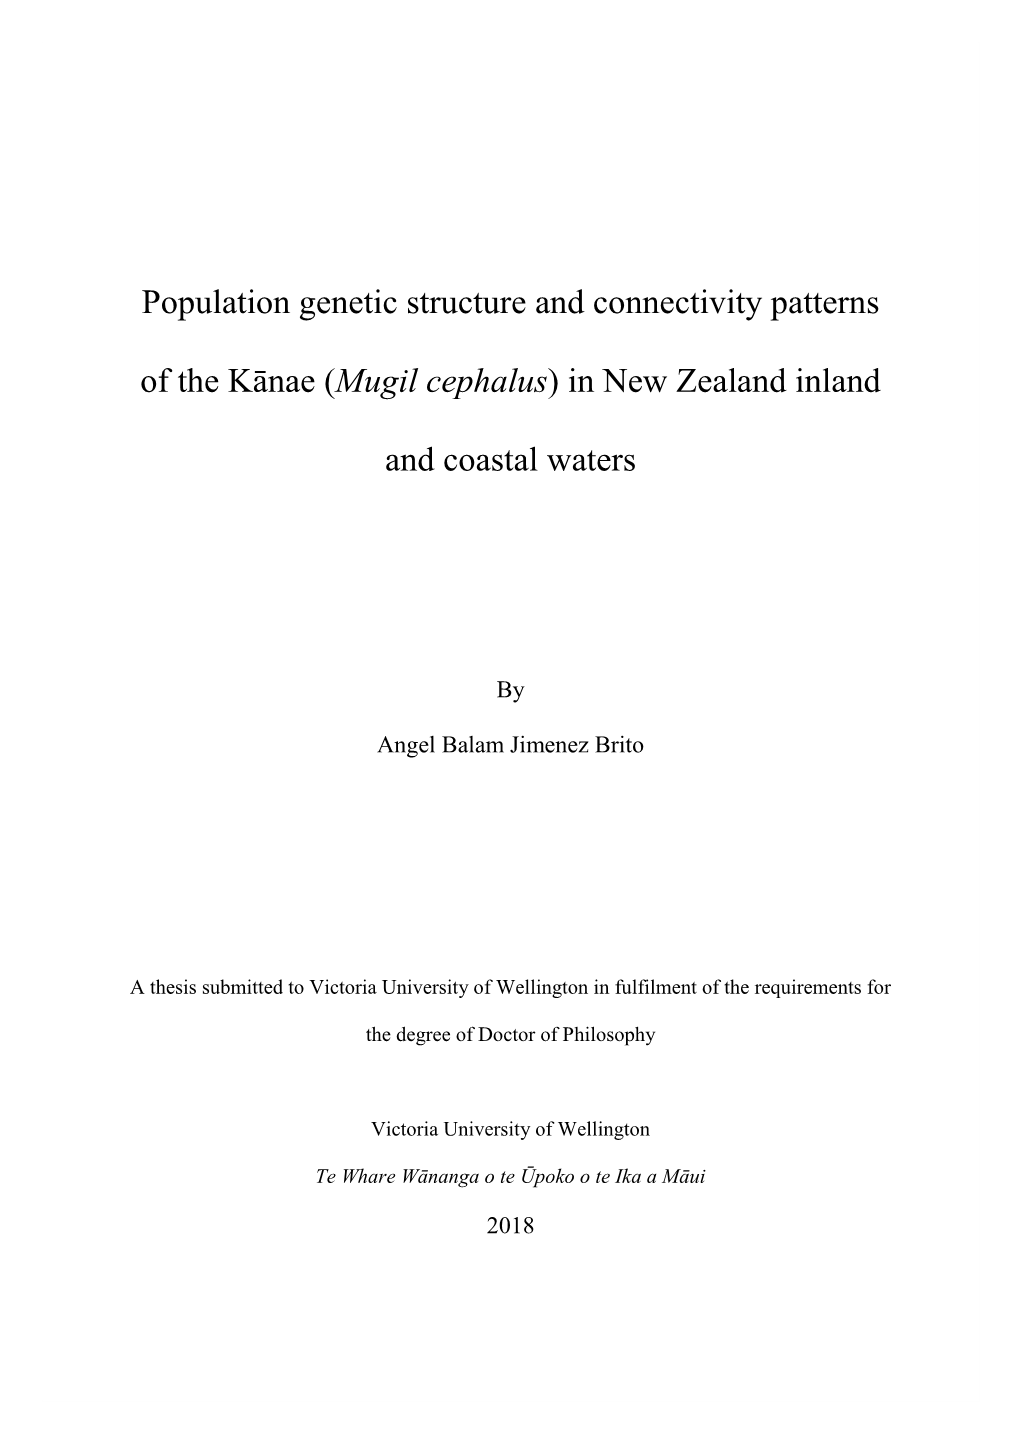 Population Genetic Structure and Connectivity Patterns of the Kānae (Mugil Cephalus) in New Zealand Inland and Coastal Waters